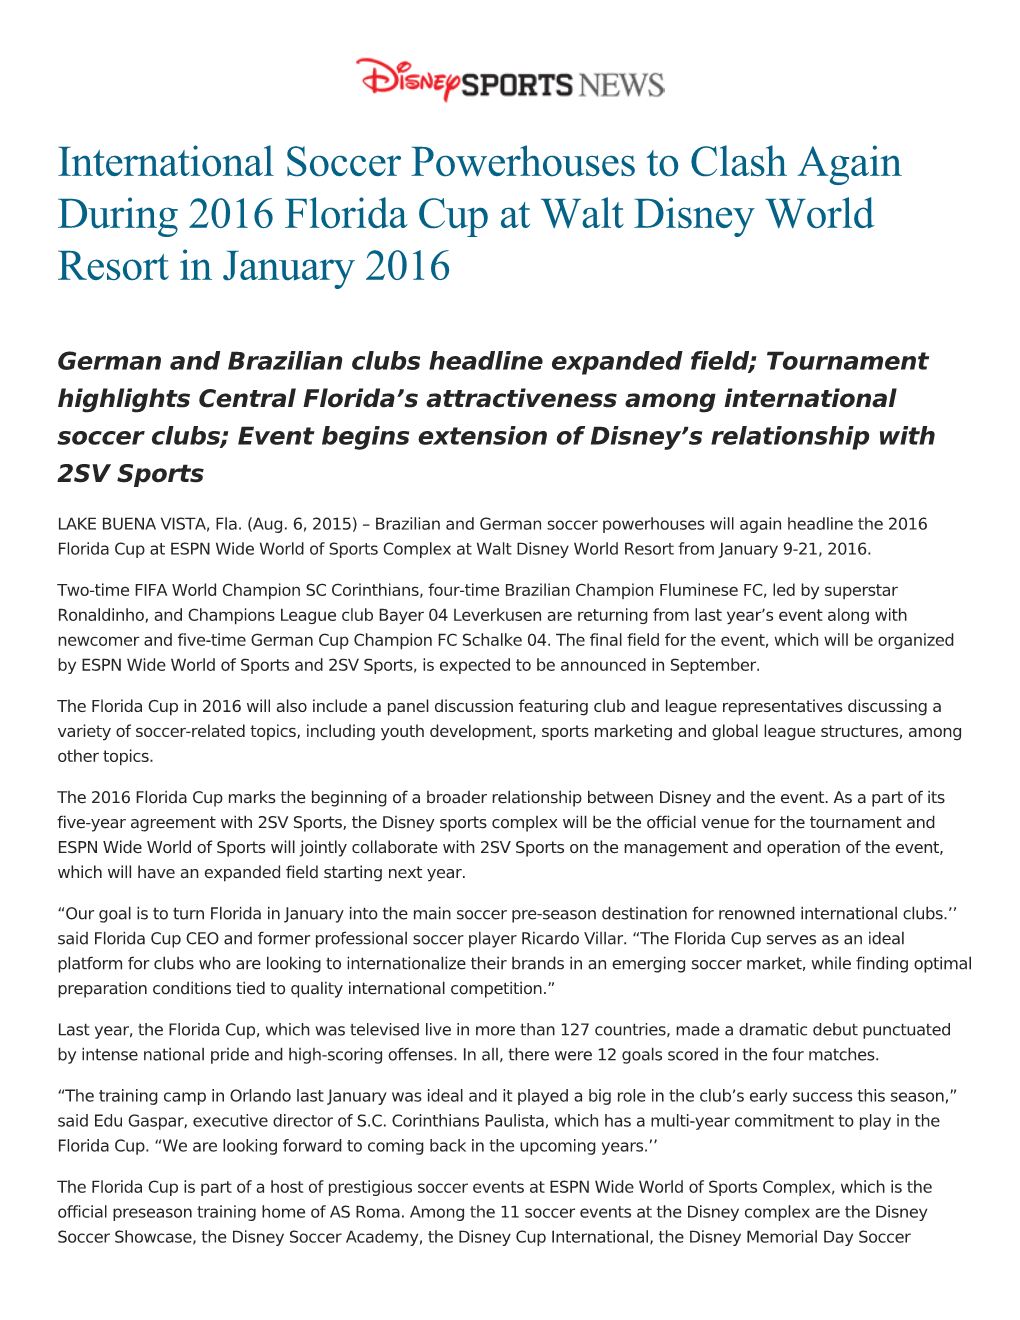 International Soccer Powerhouses to Clash Again During 2016 Florida Cup at Walt Disney World Resort in January 2016